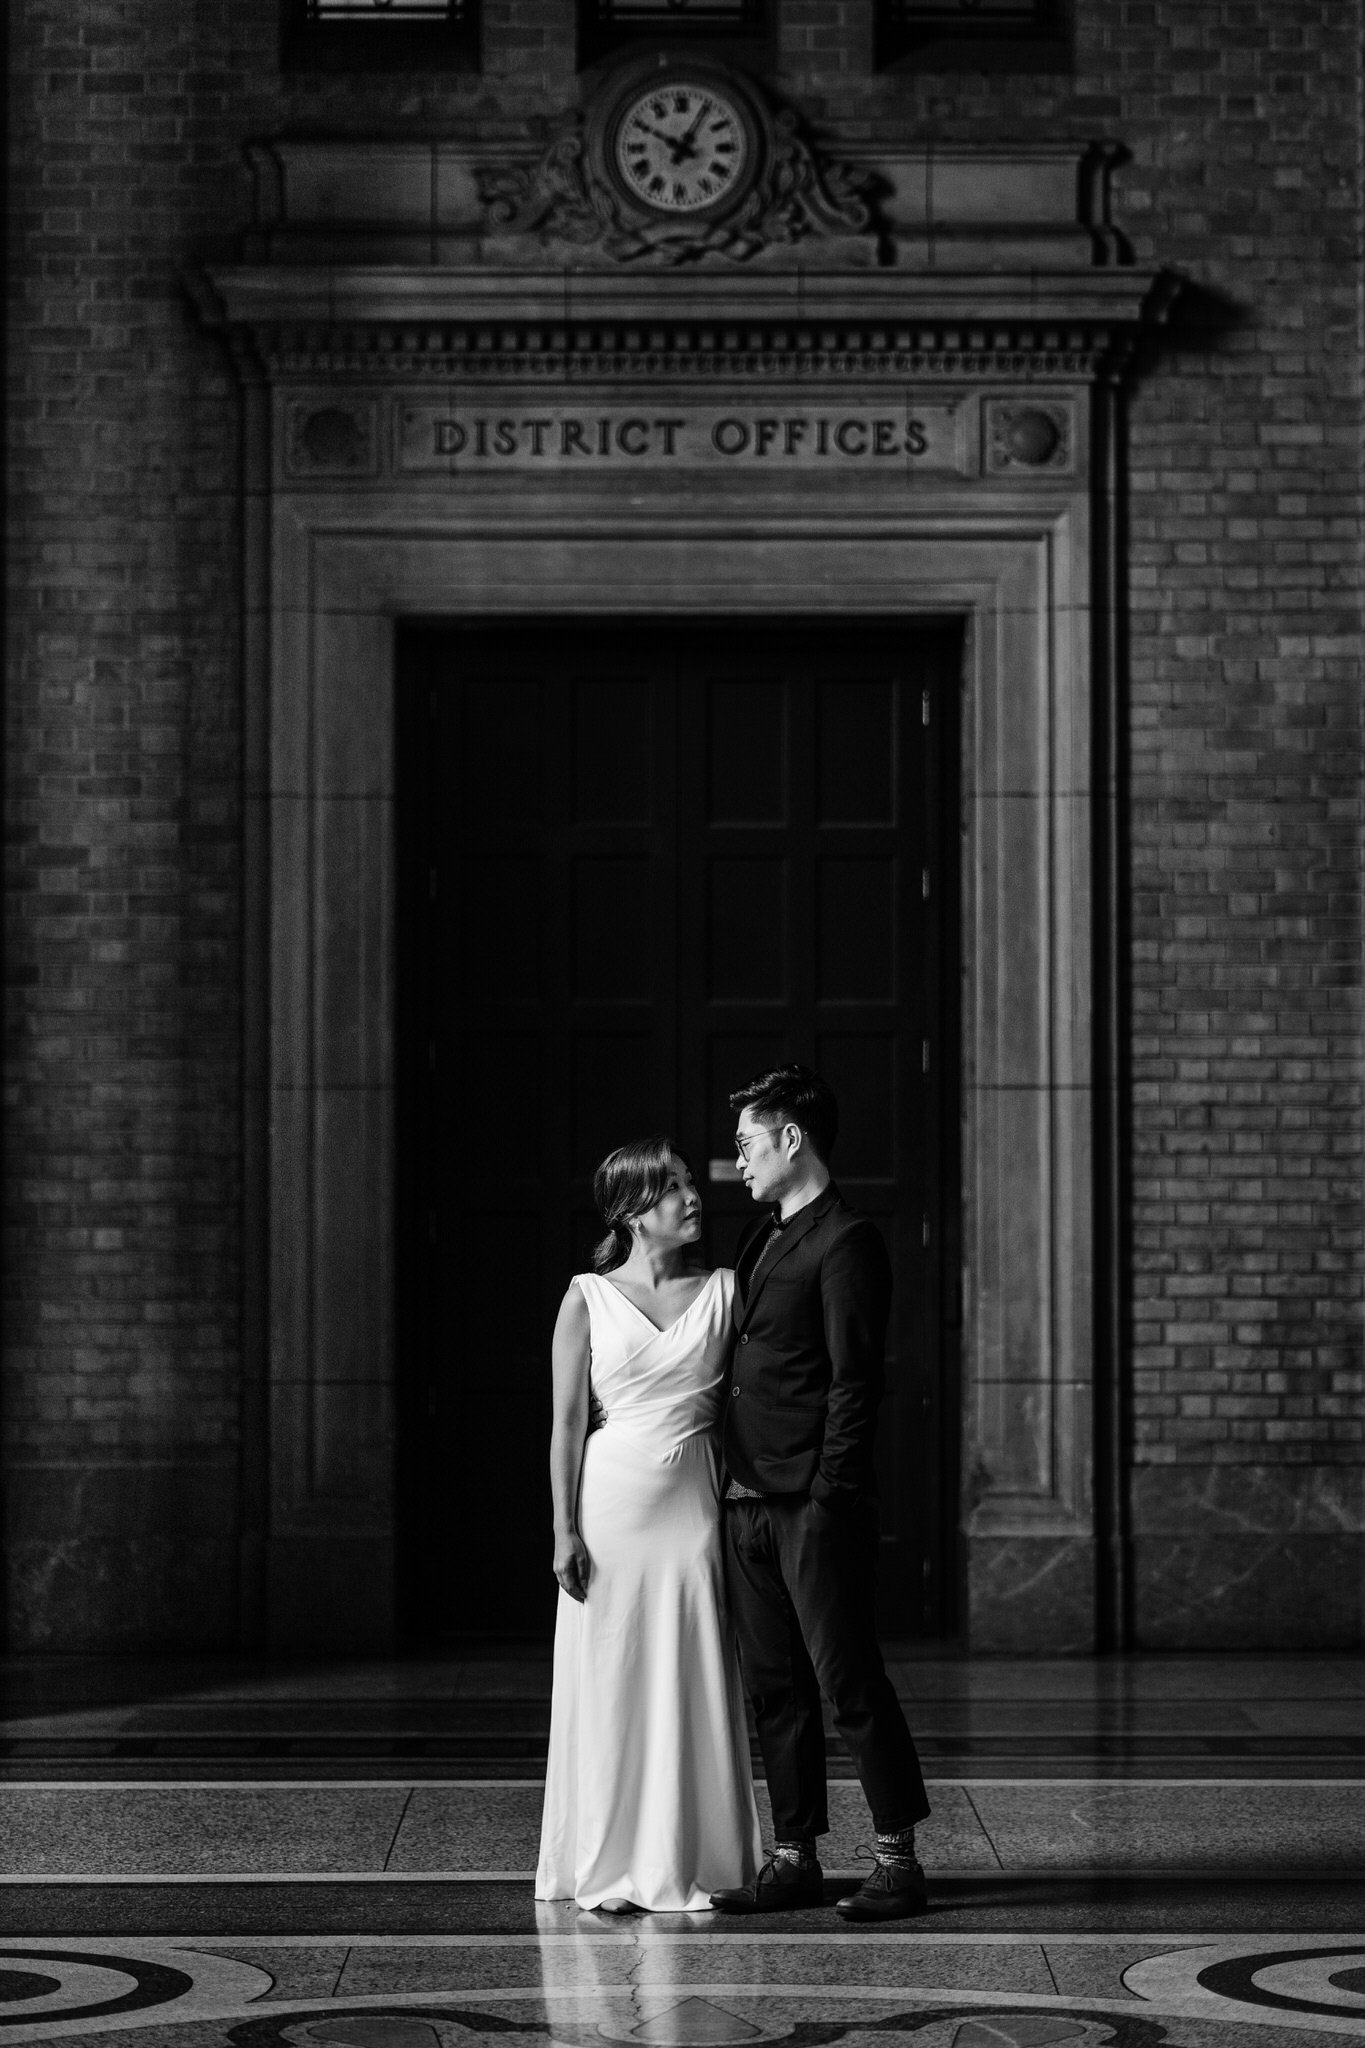 auckland-wedding-photographer-videographer-story-by-koo-koo's-jewelry-dear-white-productions-old-train-station-new-zealand-moody-historical-pre-wedding-engagement-photo (3).JPG